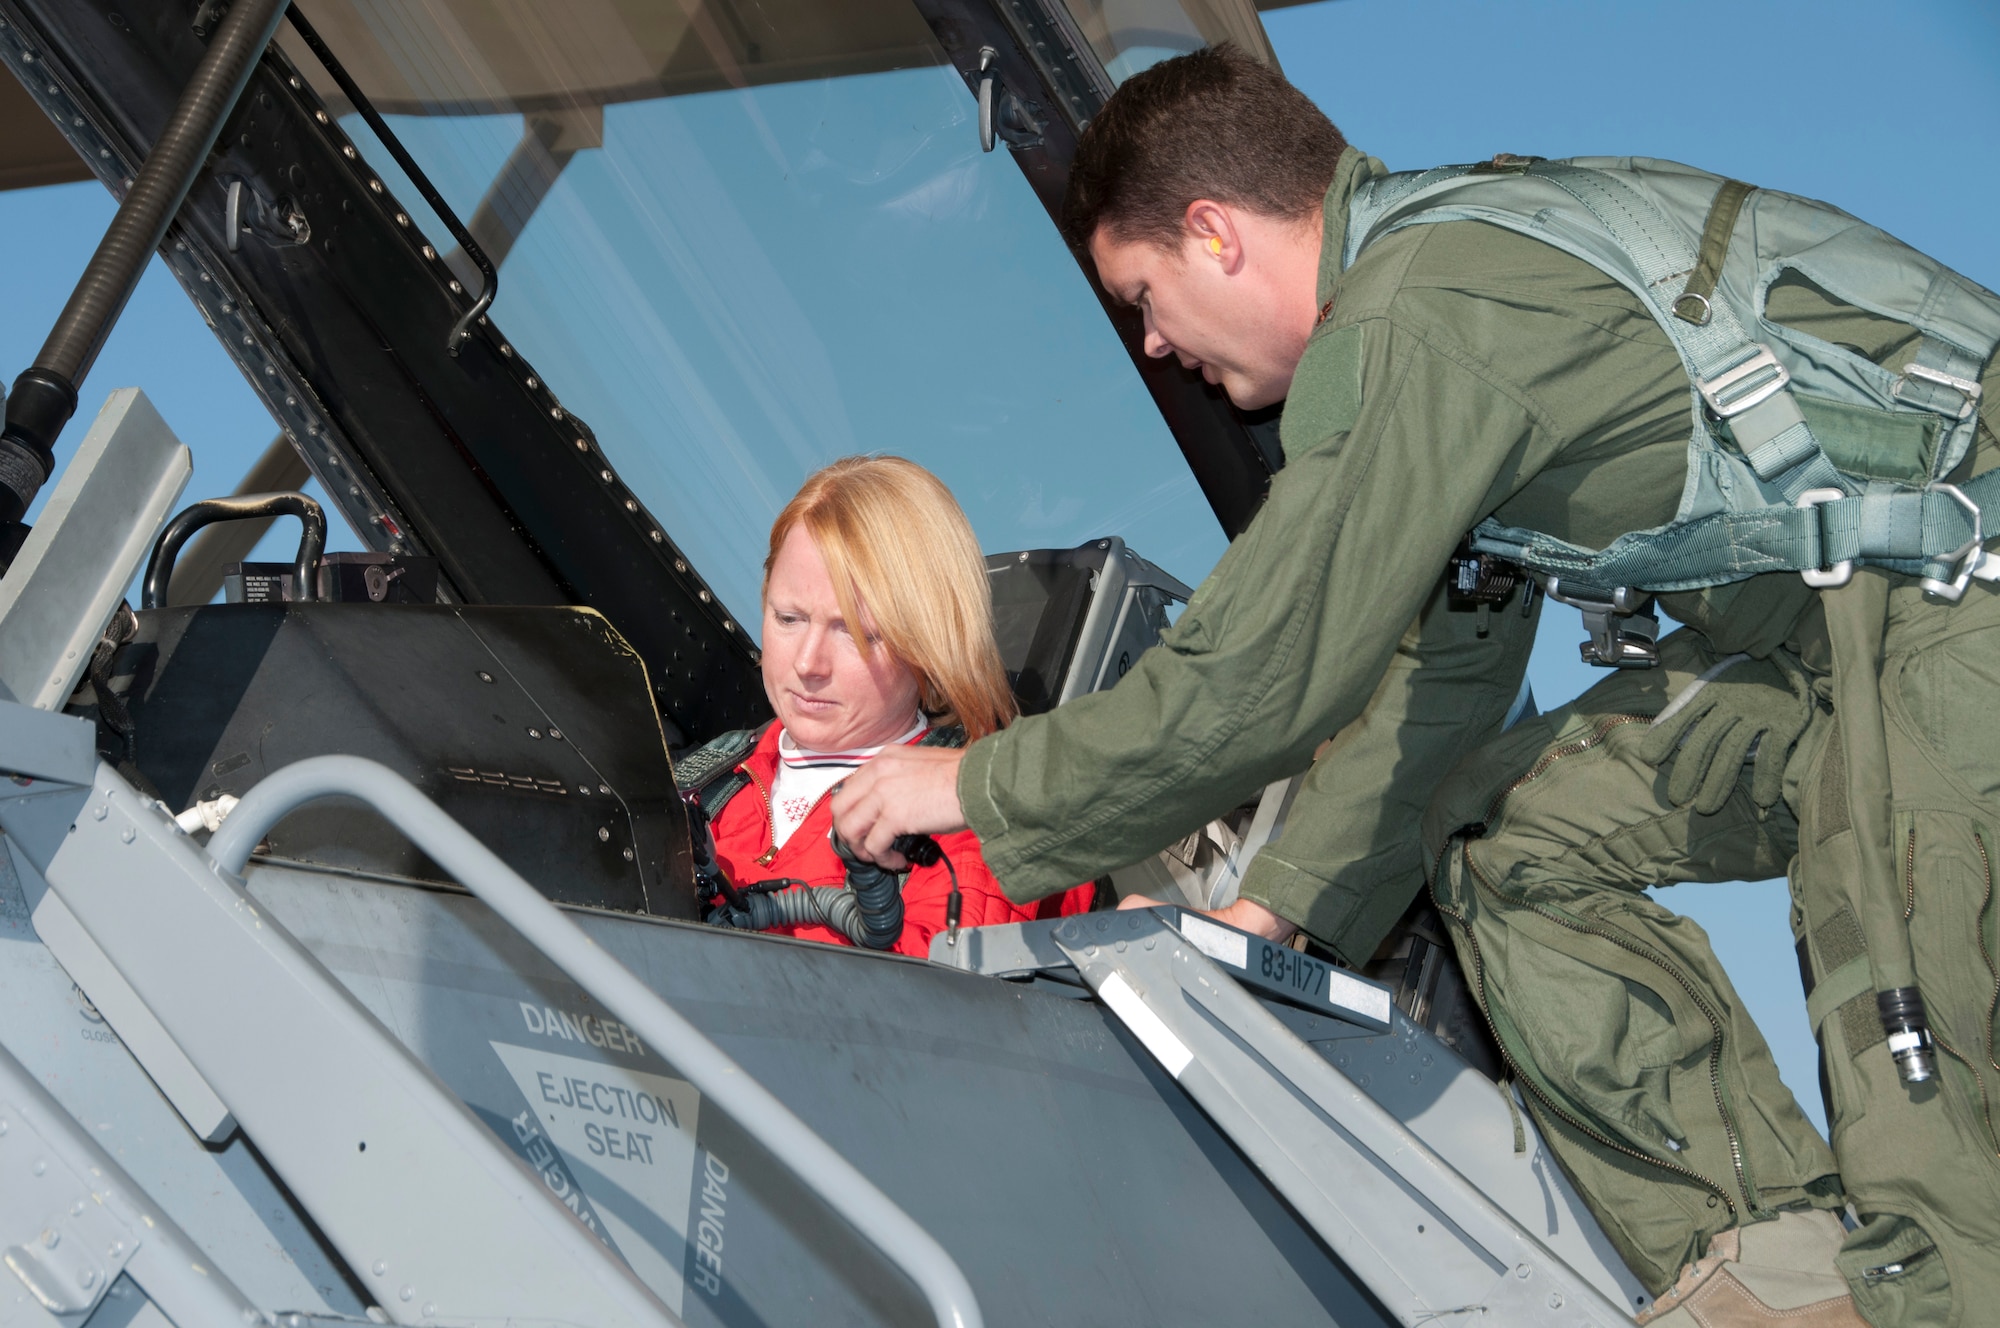 Maj. John Smith, an instructor pilot at the 162nd Fighter Wing, ensures RAF Flight Lt. Kirsty Stewart is ready to fly in an F-16 Fighting Falcon at Tucson International Airport, Oct. 21. (U.S. Air Force photo/Master Sgt. Dave Neve)